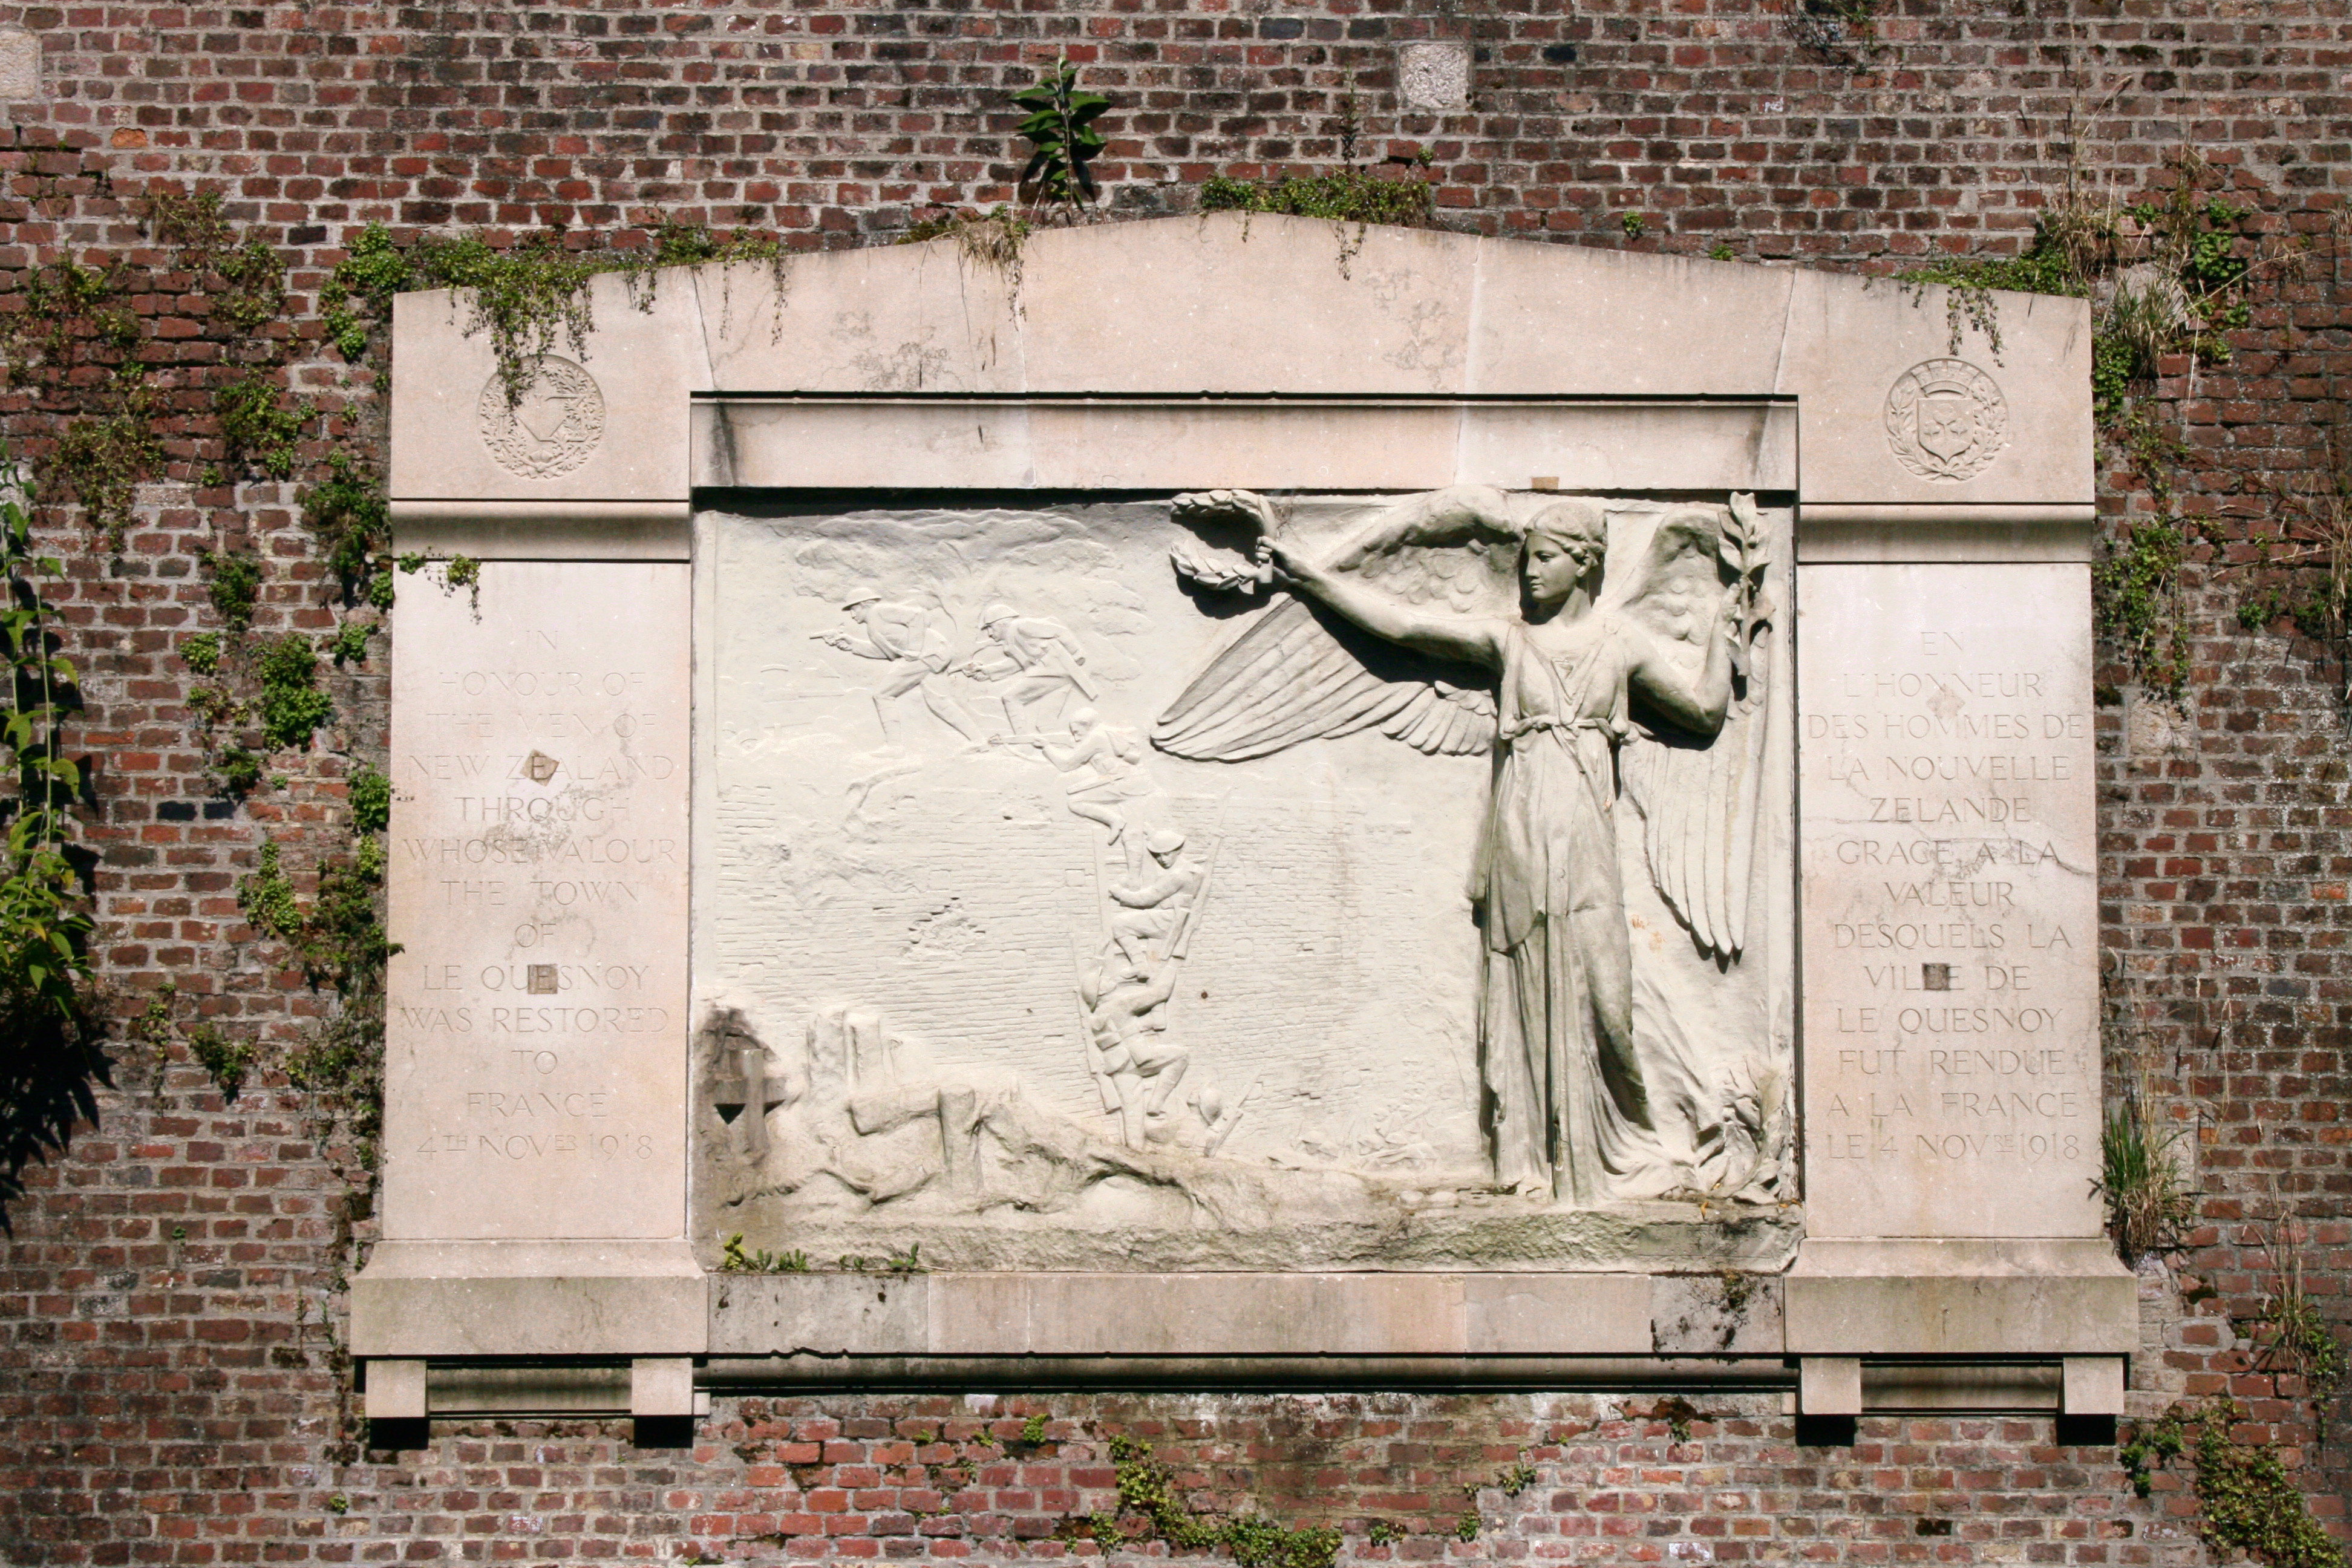 The New Zealand monument commemorating the liberation of Le Quesnoy. Photo taken on March 21, 2007.